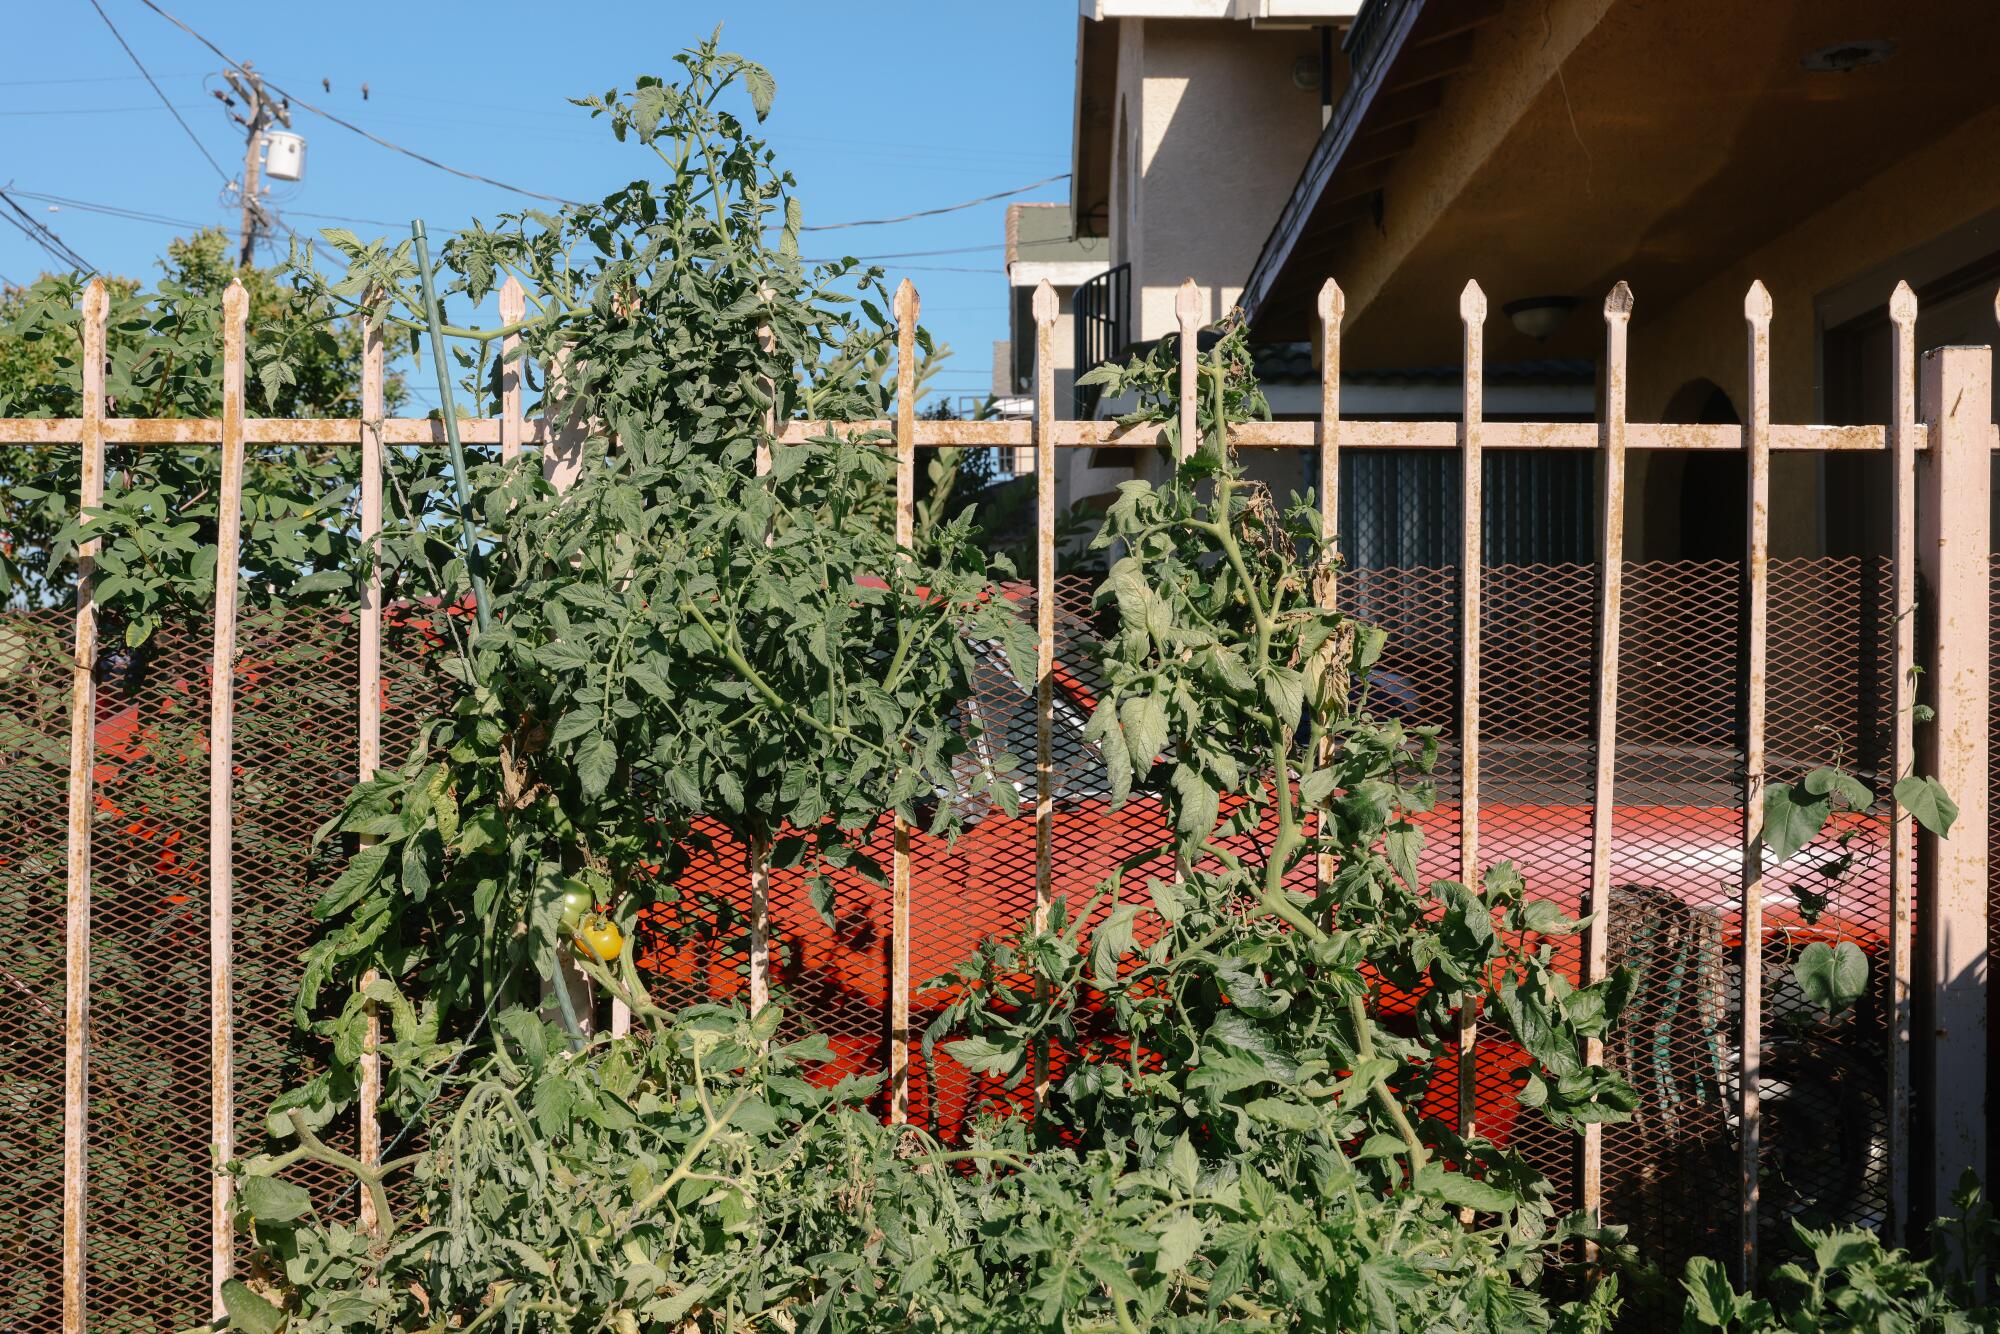 A metal fence with tomato vines climbing it